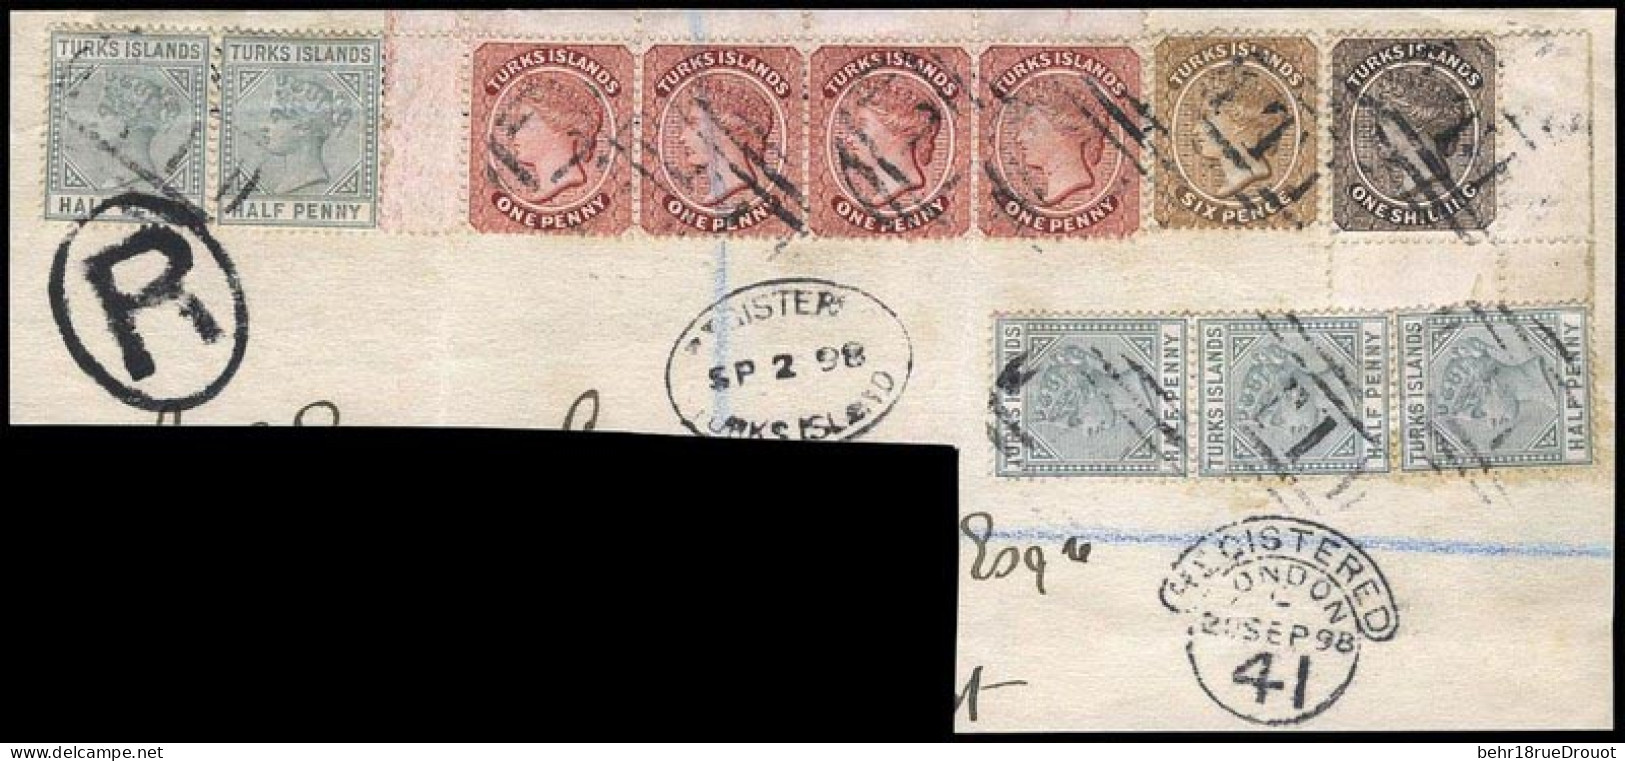 Obl. SG#53x5 + 58x4 - + 59 + 60. Used On Part Of Letter. VF. - Turks And Caicos